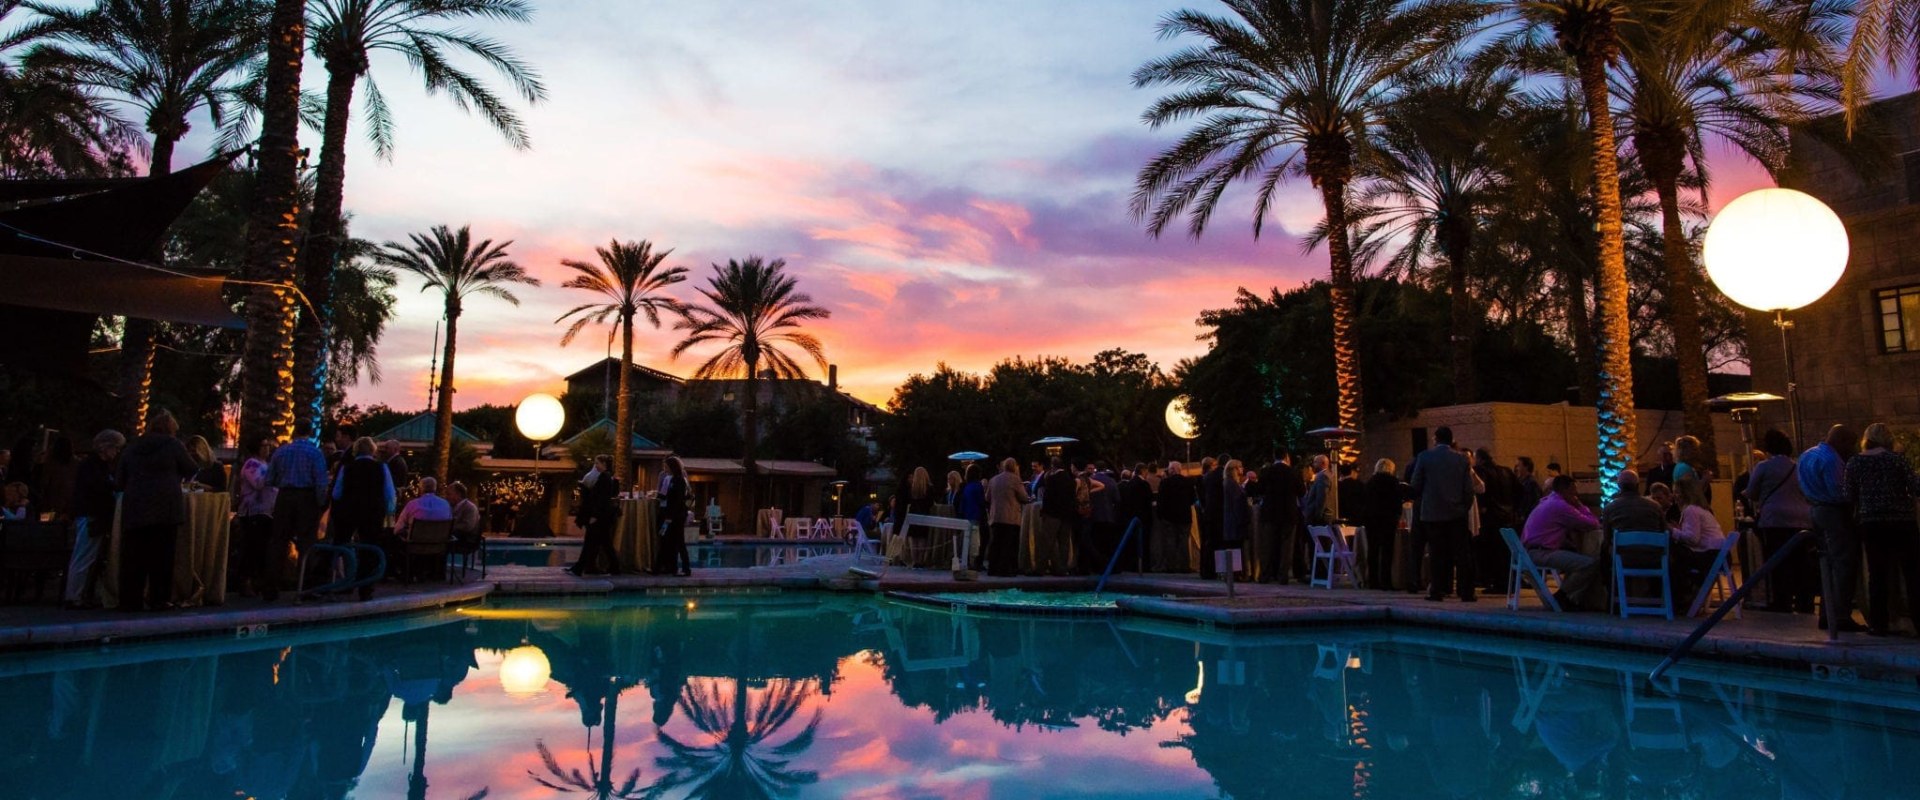 Networking Events in Scottsdale, AZ: Connect with Business People and Strengthen Your Skills